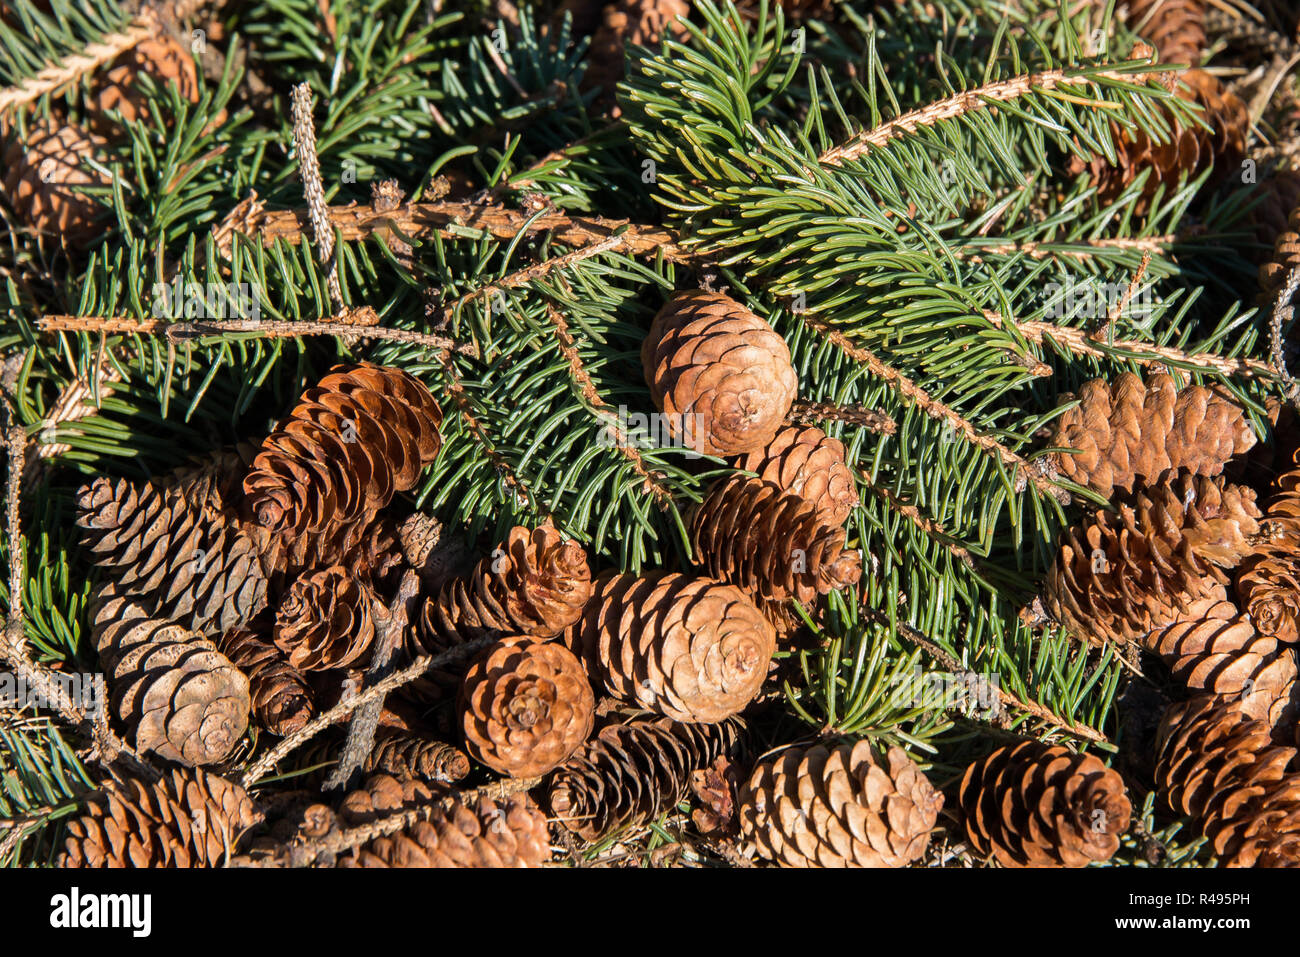 A pile of pine cones and branches fallen on the forest floor. Stock Photo